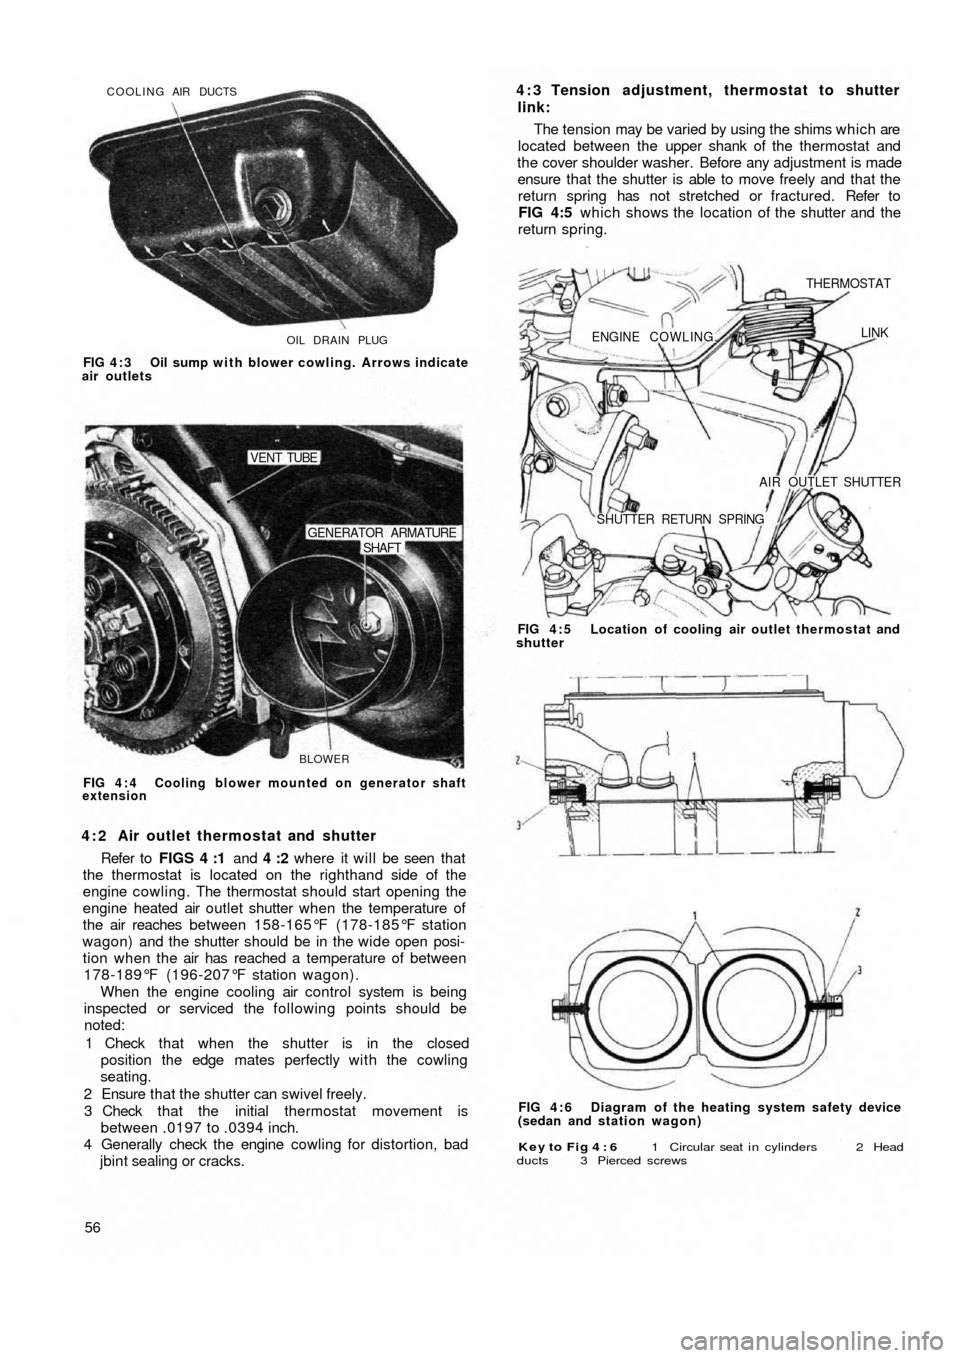 FIAT 500 1970 1.G Workshop Manual OIL DRAIN PLUG COOLING AIR DUCTS
FIG 4 : 3  Oil sump with blower cowling. Arrows indicate
air outlets
BLOWER
SHAFT GENERATOR ARMATURE
VENT TUBE
FIG 4 : 4  Cooling blower mounted on generator shaft
ext